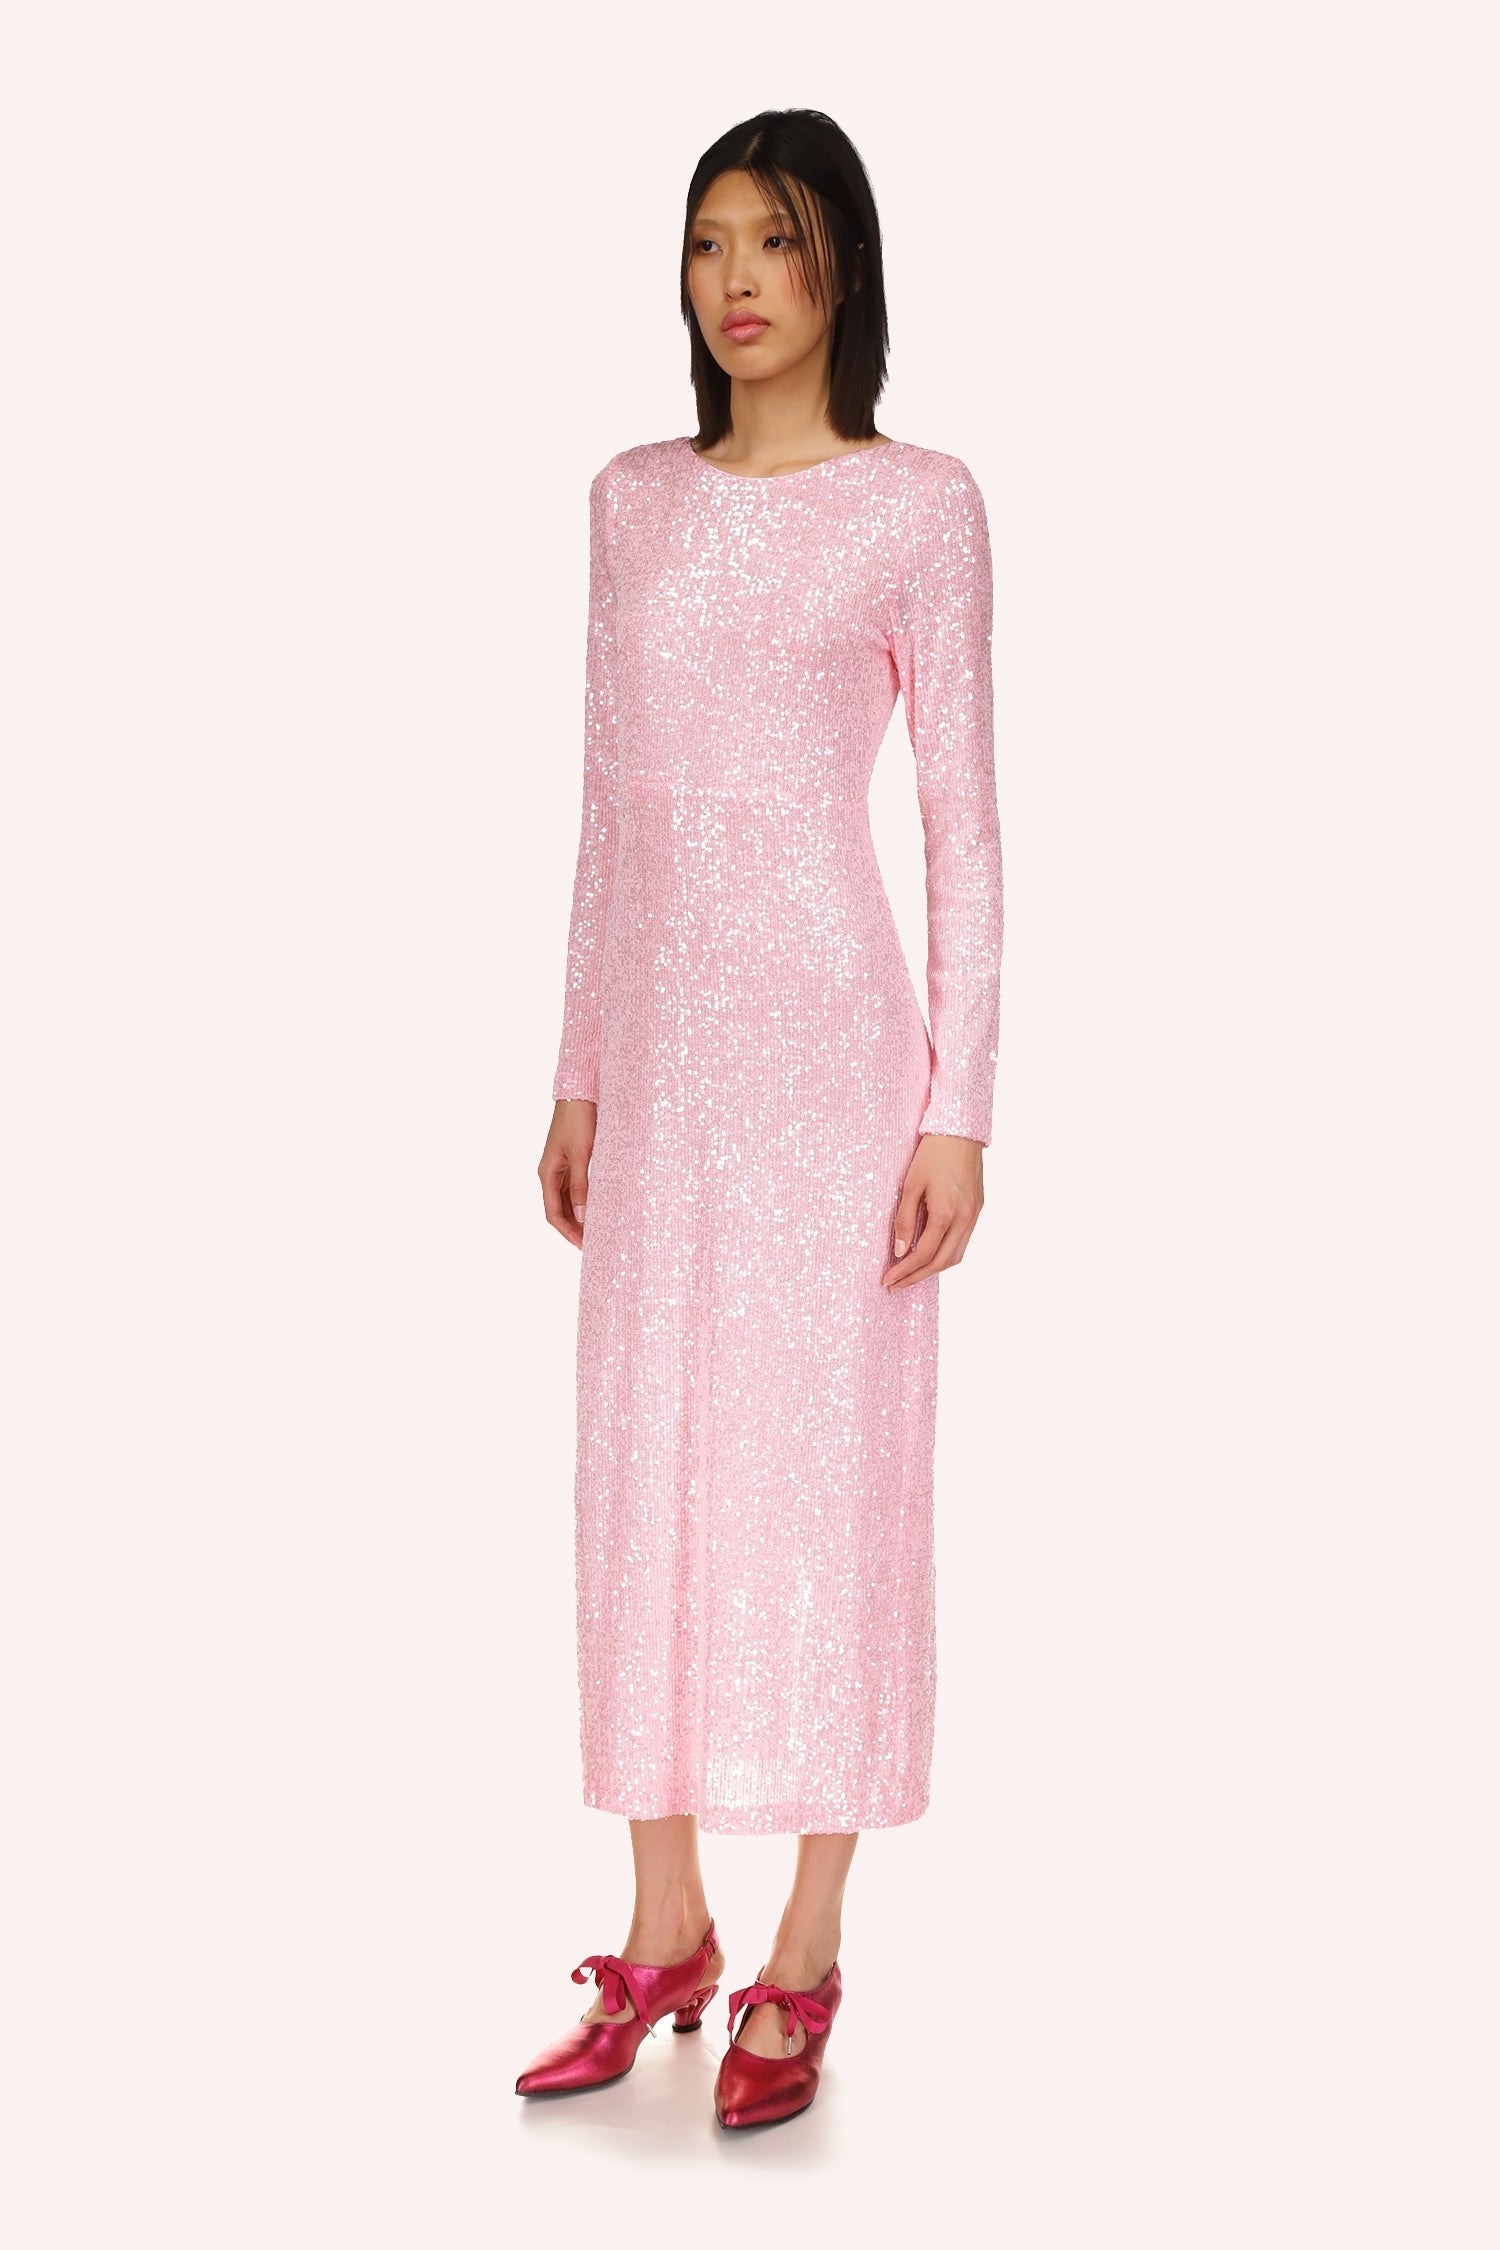 The Sequin Mesh mid-calf long designed by Anna Sui, is a sophisticated gown in a soft baby pink color